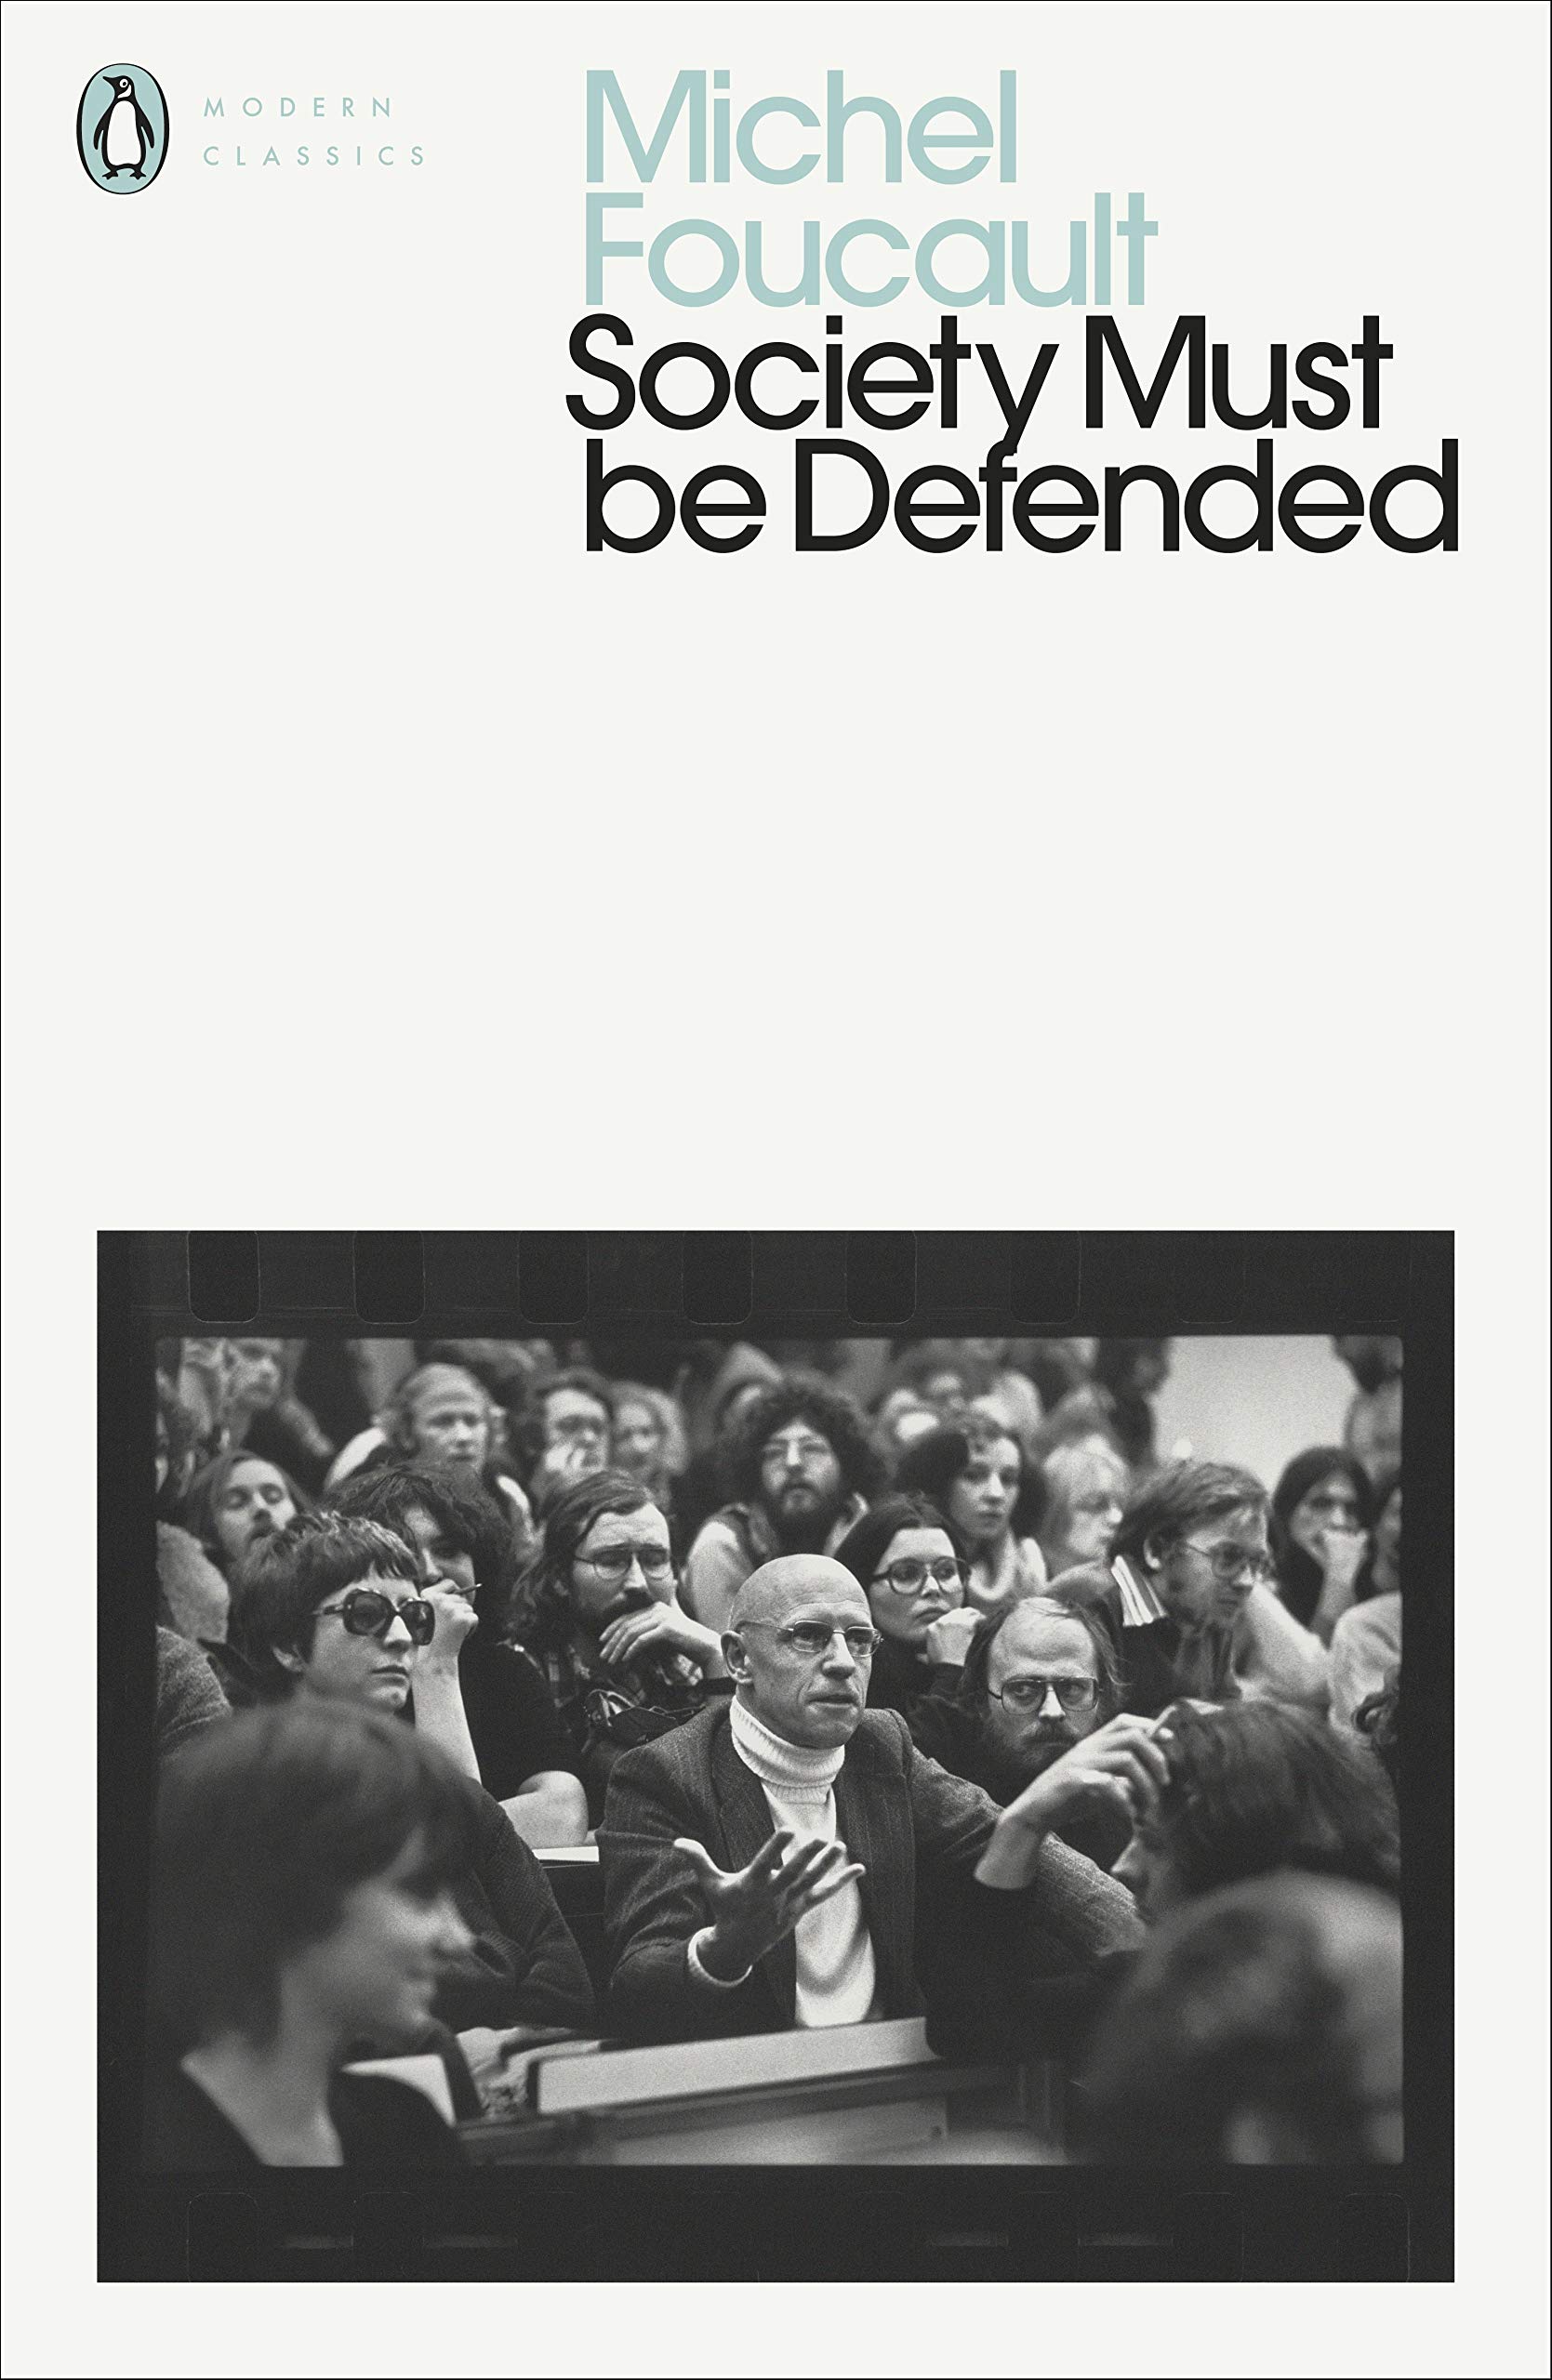 Society Must be Defended | Michel Foucault image12